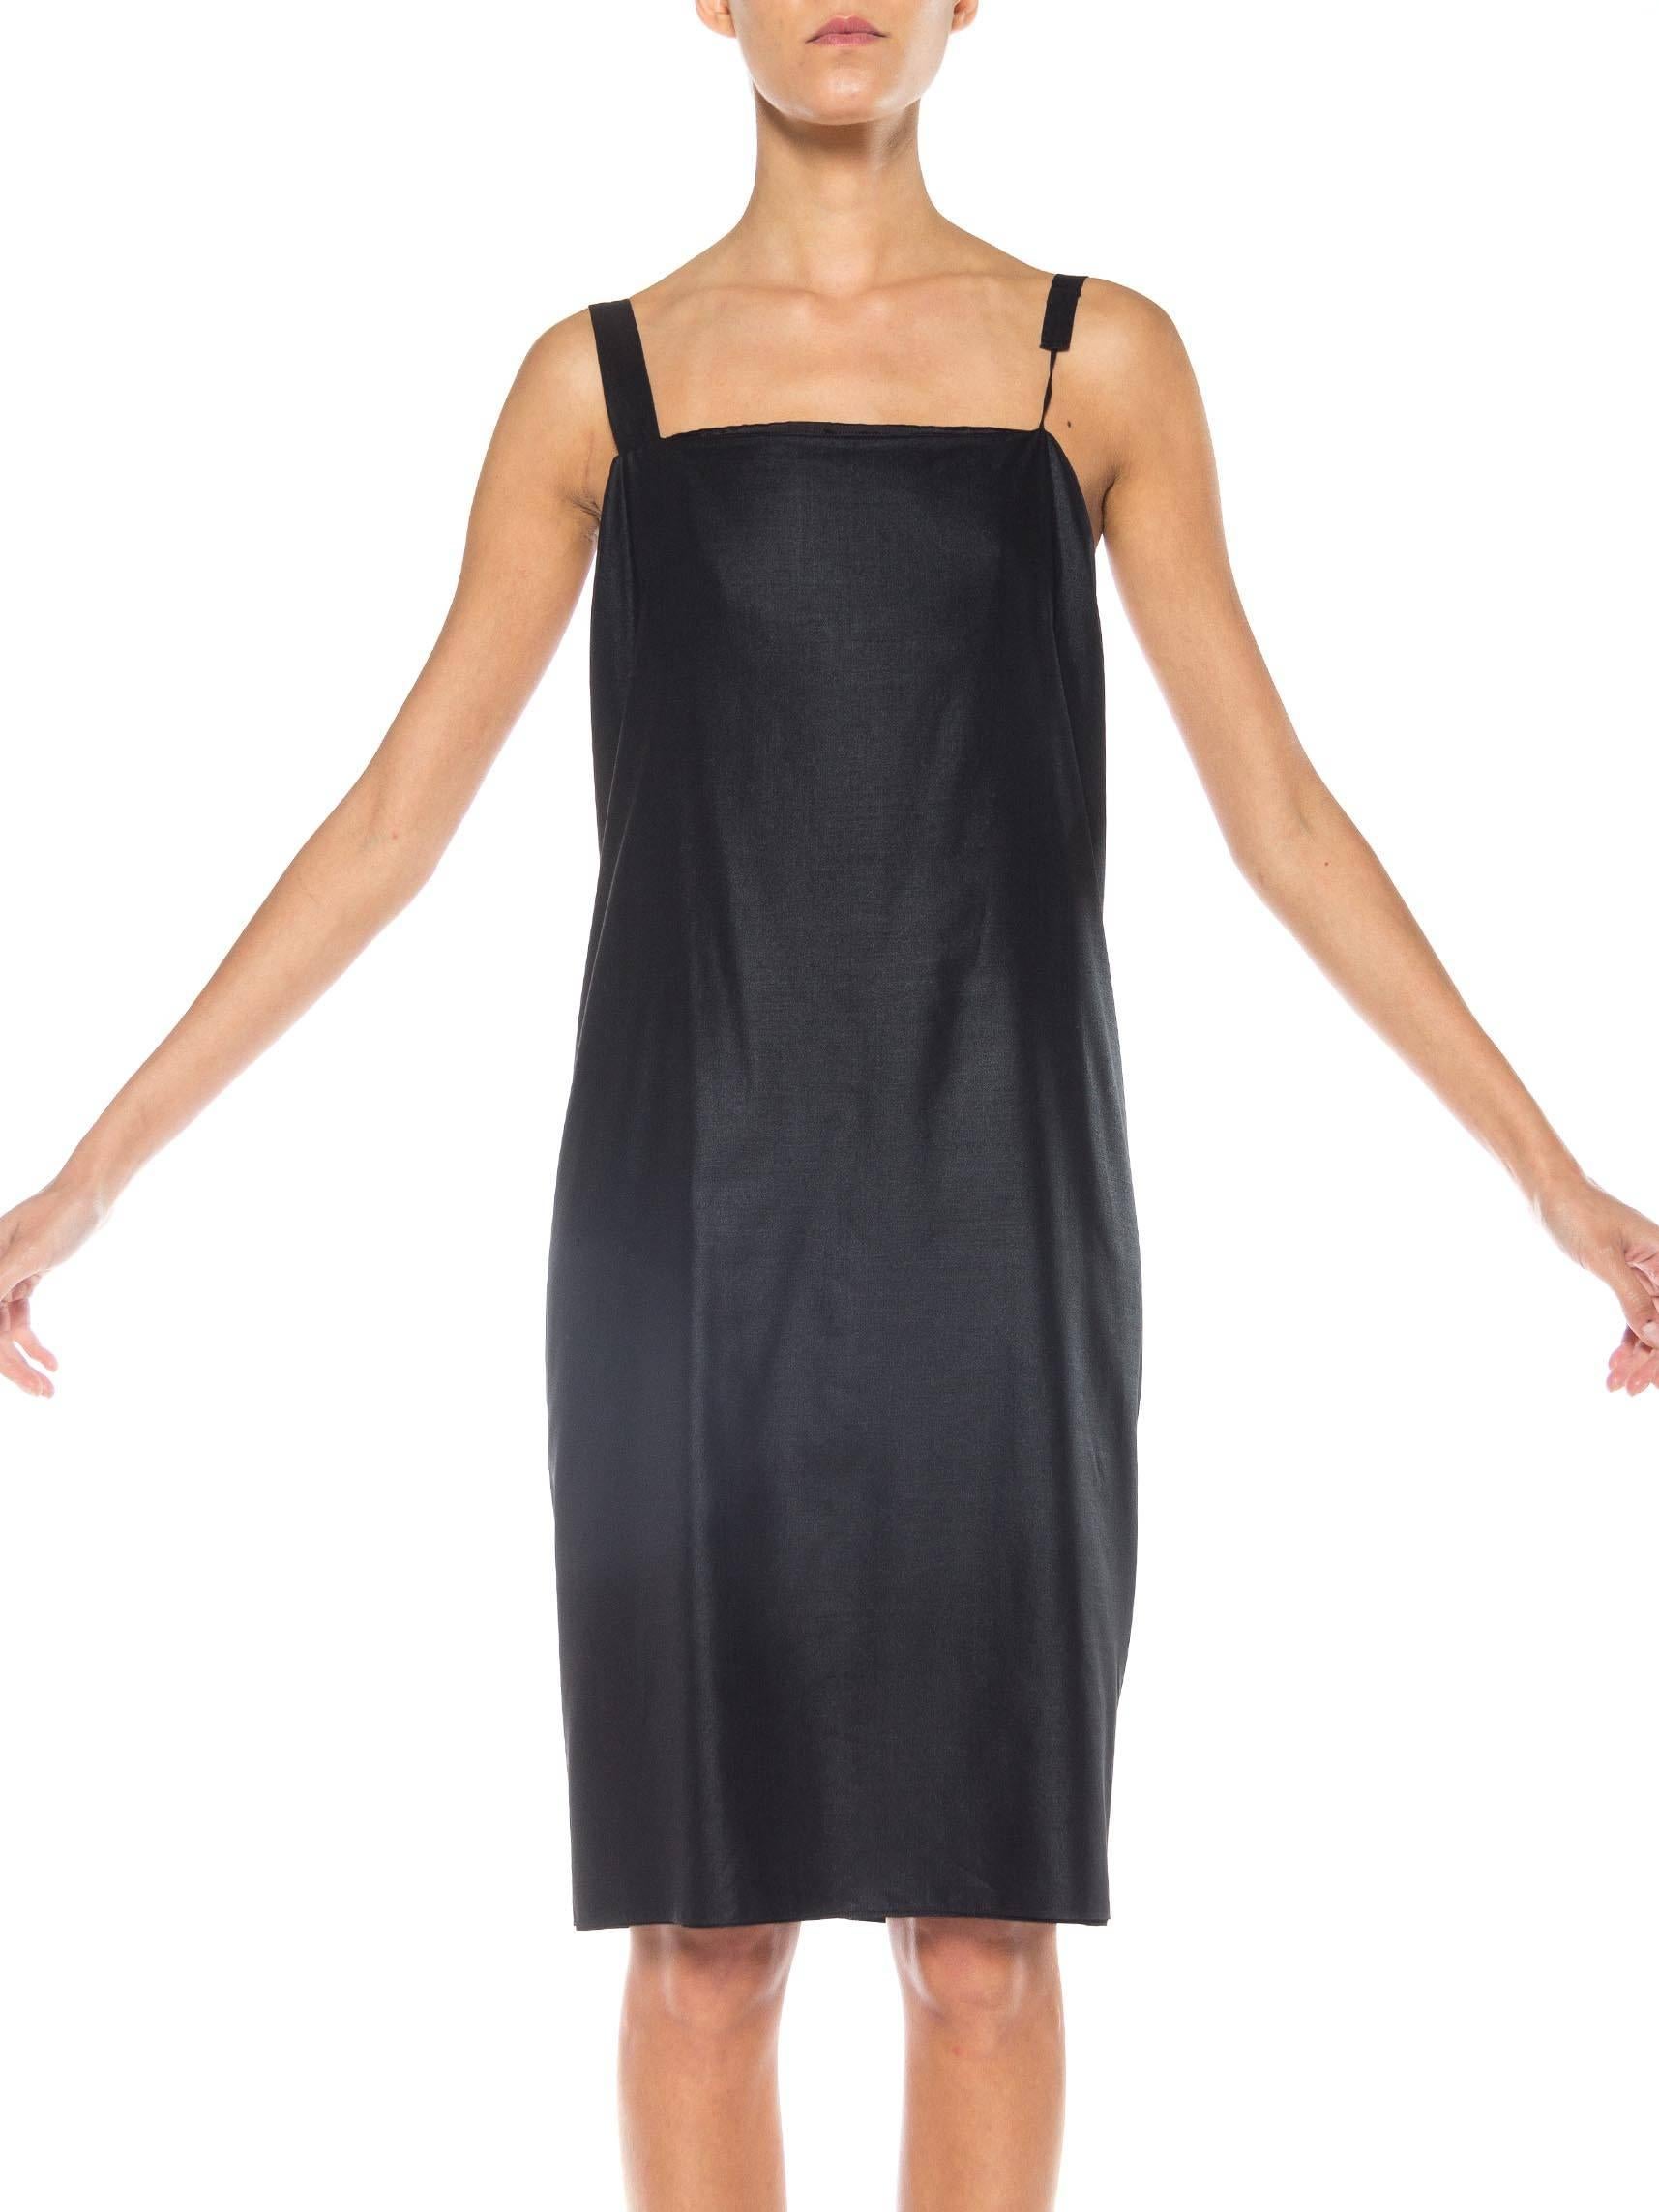 Bust and waist have 3 inches which can be let out 2000S JILL SANDER Black Metallic Cotton Asymmetrical Cocktail Dress XXS 